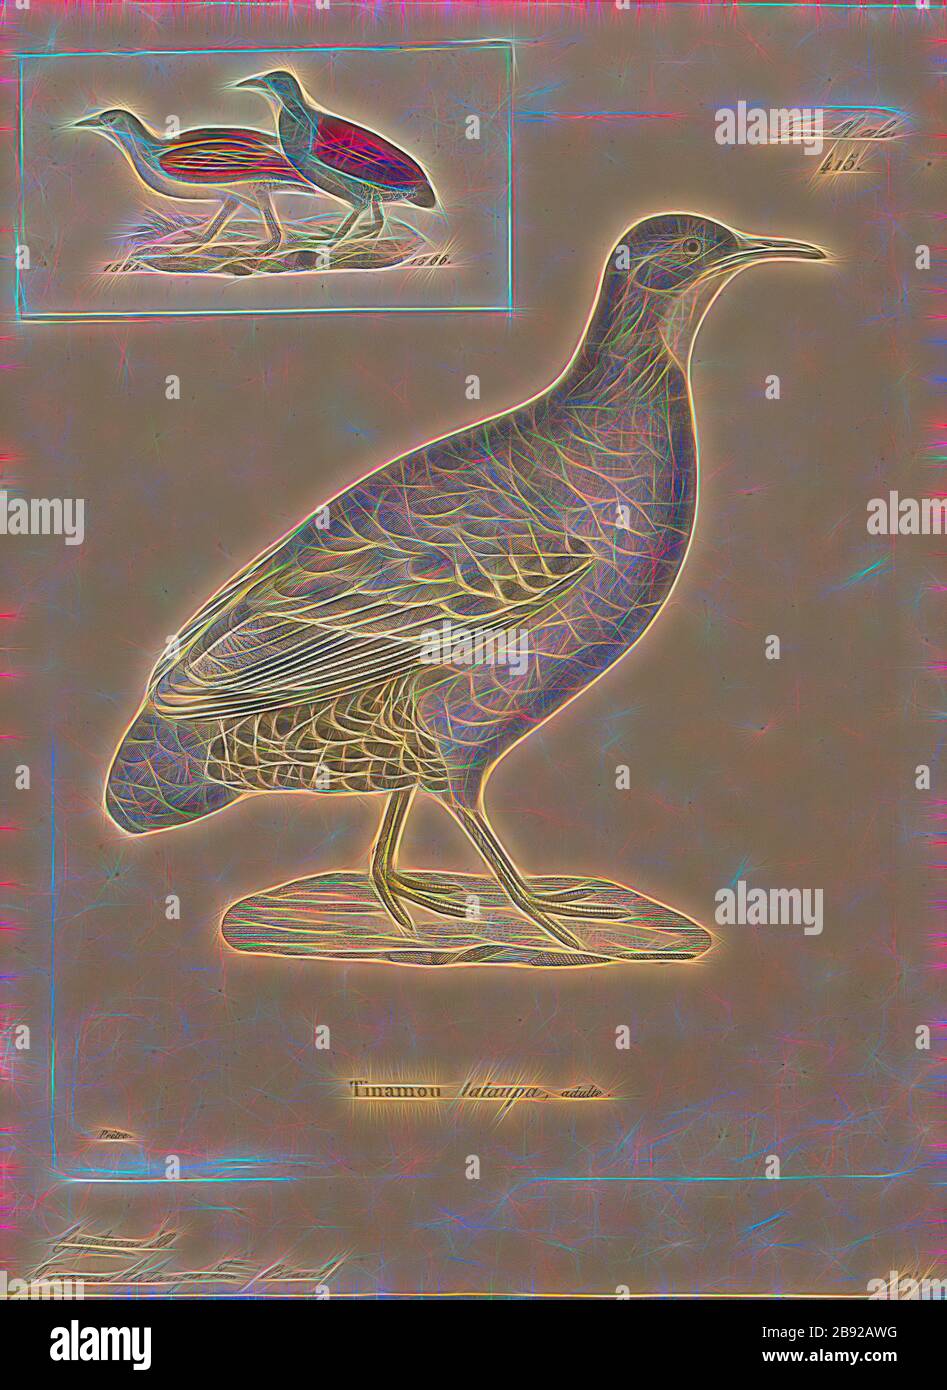 Tinamus tataupa, Print, Tinamus is a genus of birds in the tinamou family. This genus comprises some of the larger members of this South American family., 1700-1880, Reimagined by Gibon, design of warm cheerful glowing of brightness and light rays radiance. Classic art reinvented with a modern twist. Photography inspired by futurism, embracing dynamic energy of modern technology, movement, speed and revolutionize culture. Stock Photo